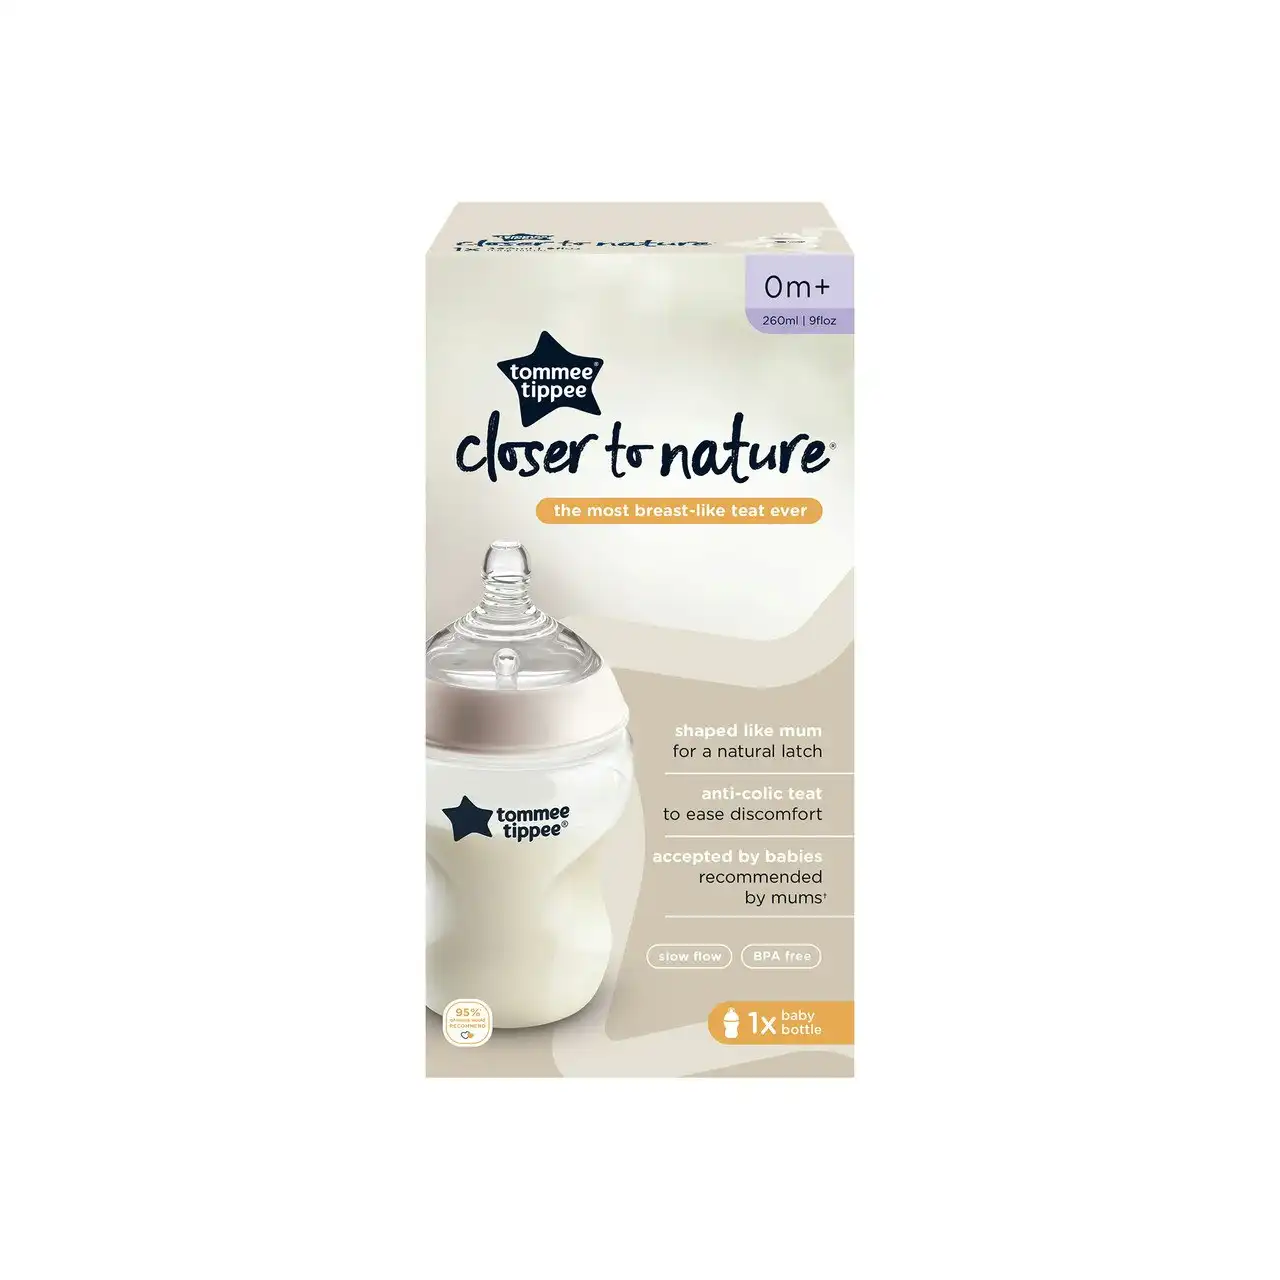 Tommee Tippee Closer to Nature Baby Bottle, 260ml, Slow Flow Breast-Like Teat for a Natural Latch Anti-Colic Valve, Pack of 1